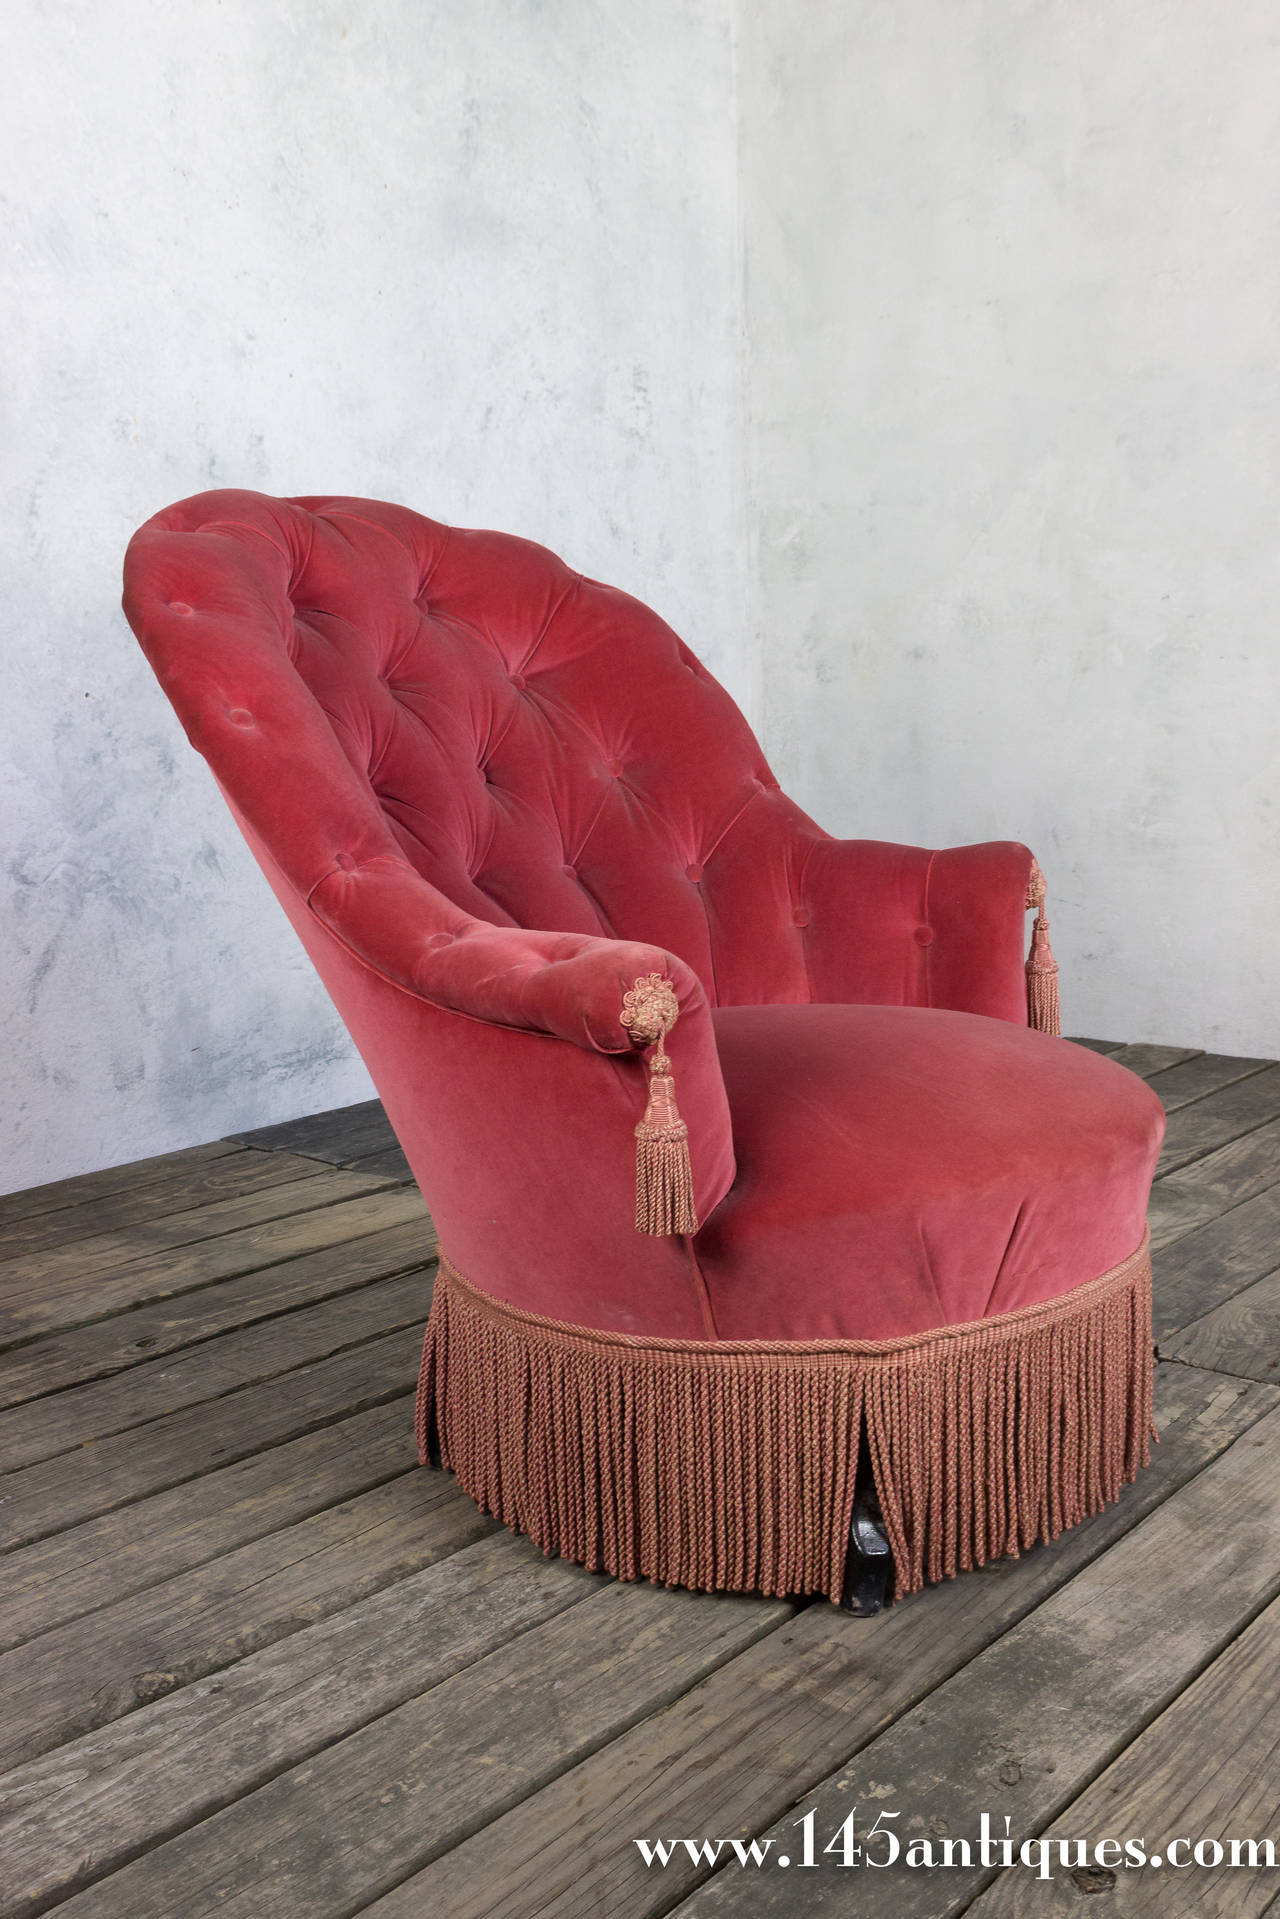 French Napoleon III style tufted armchair with a curved back. The chair has a great pitch making this an extremely comfortable chair. Upholstered in rose colored velvet with matching bouillon fringe.